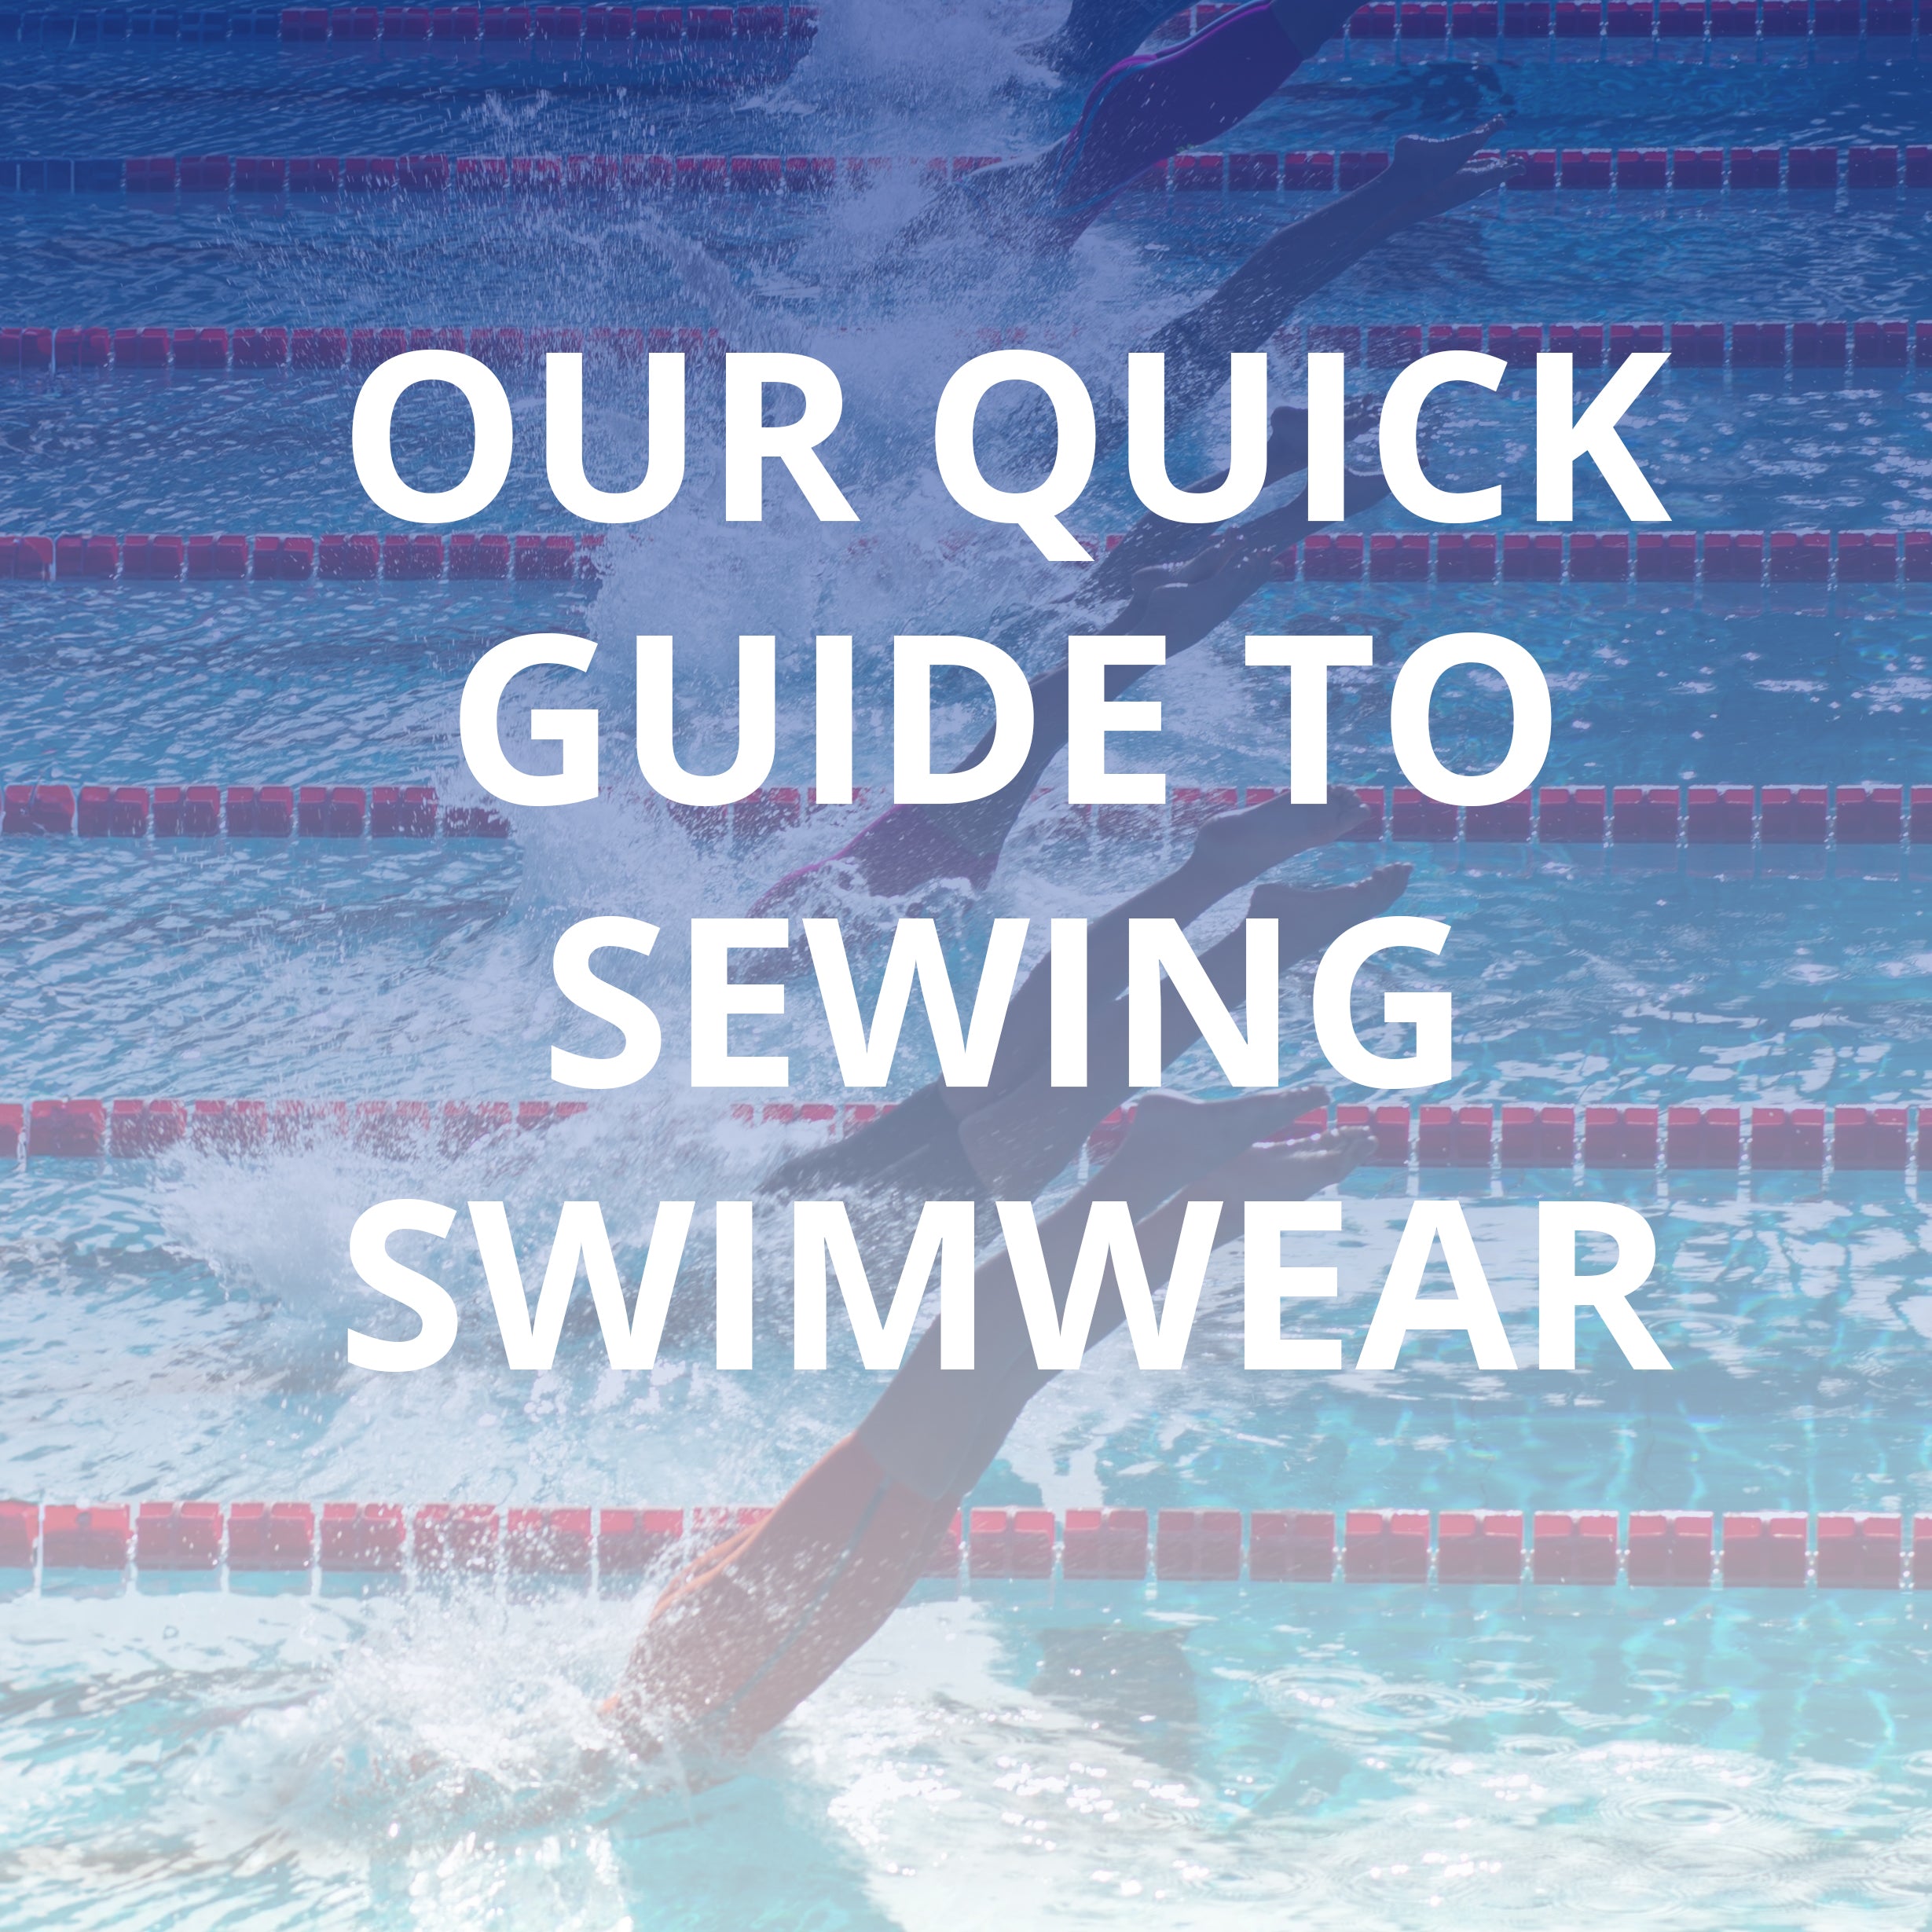 Our quick guide to sewing swimwear